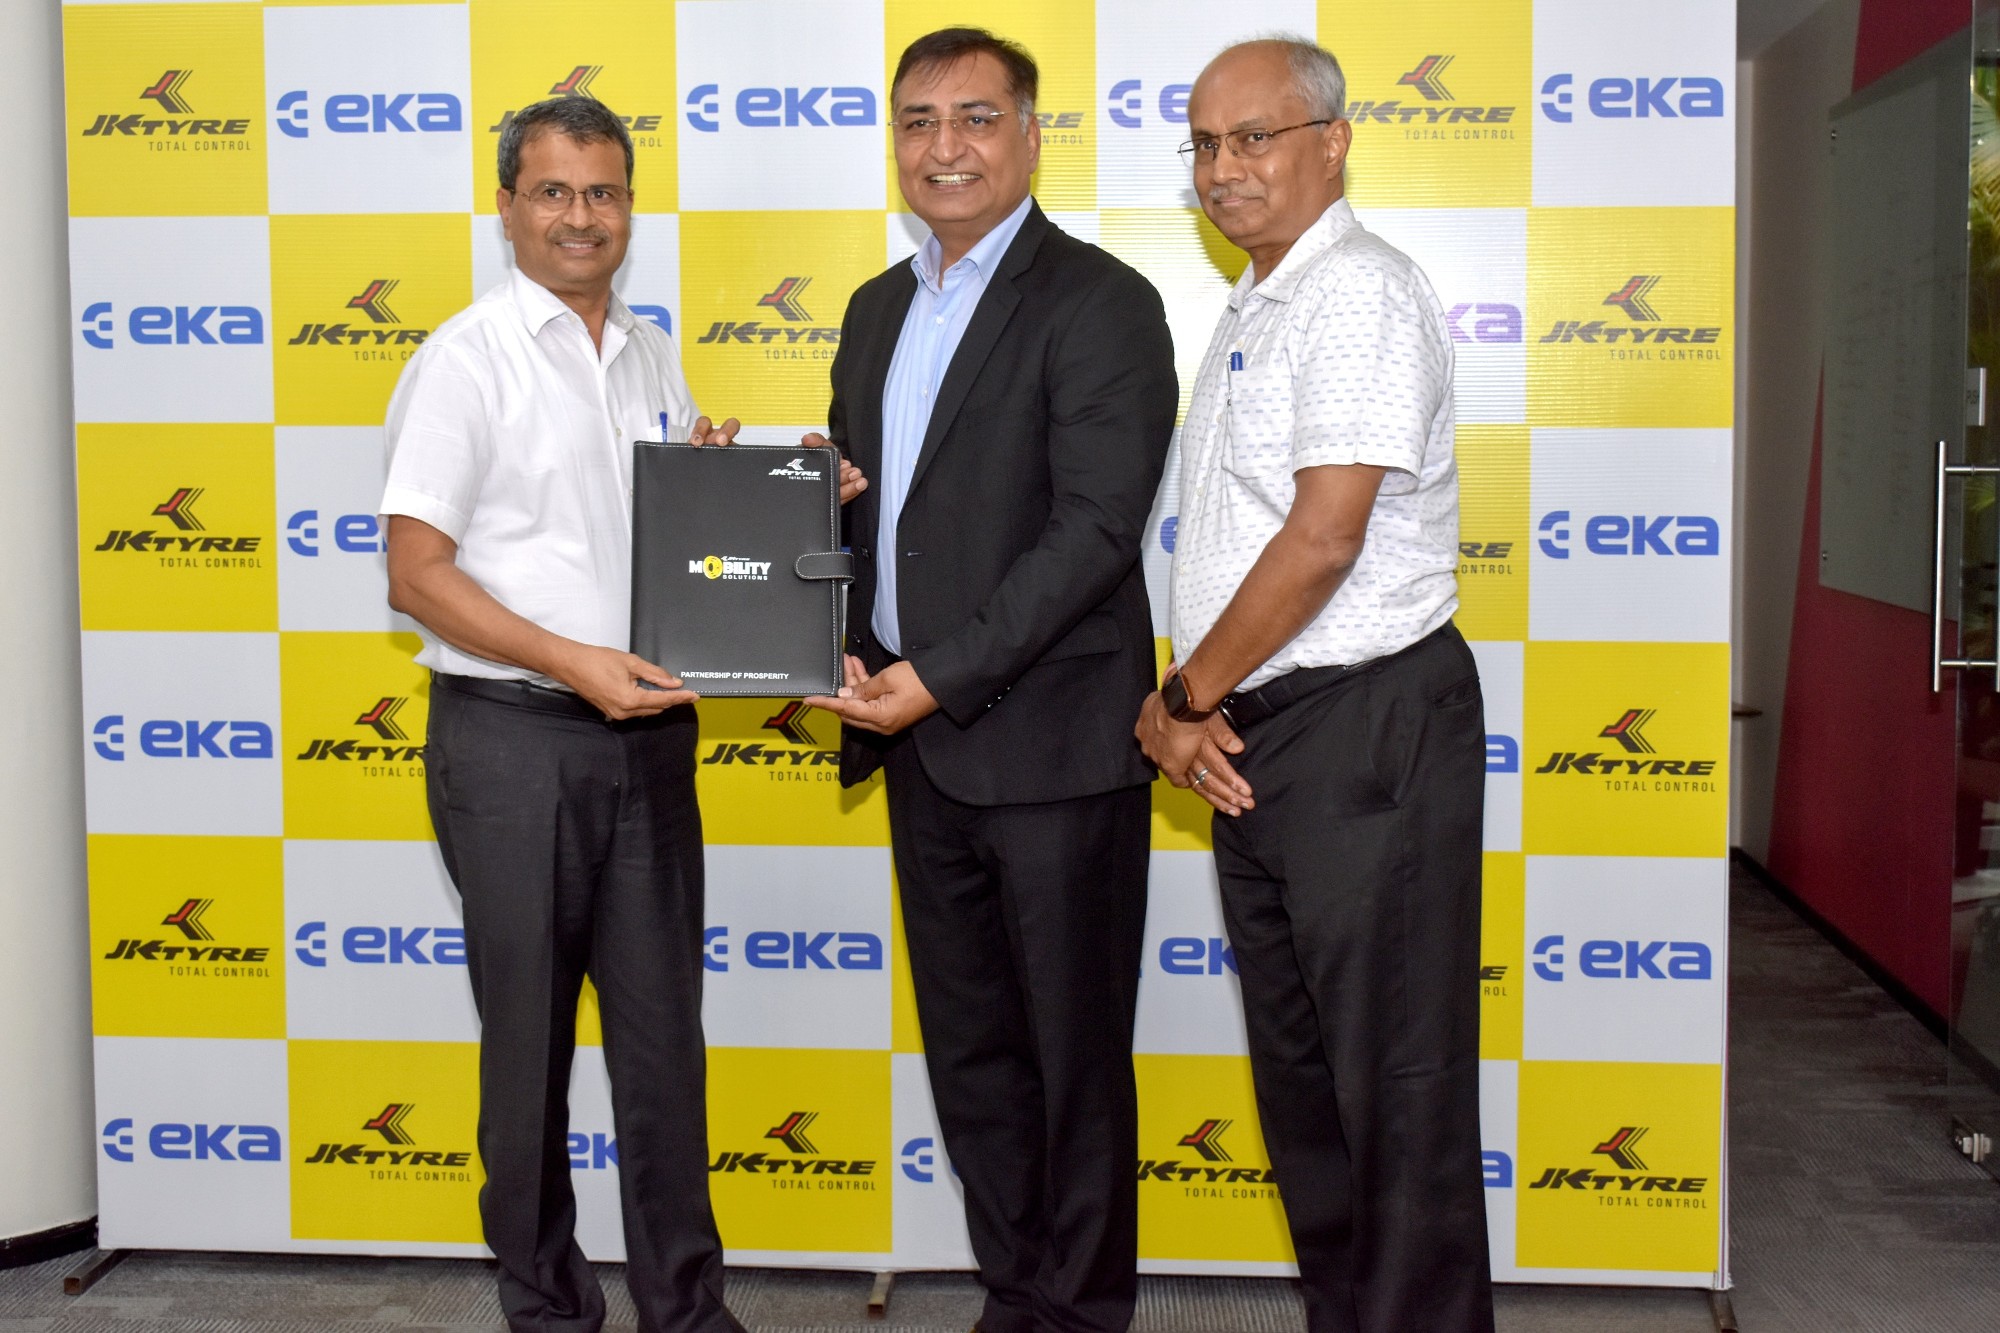 JK Tyre & EKA Mobility work together to provide mobility solutions